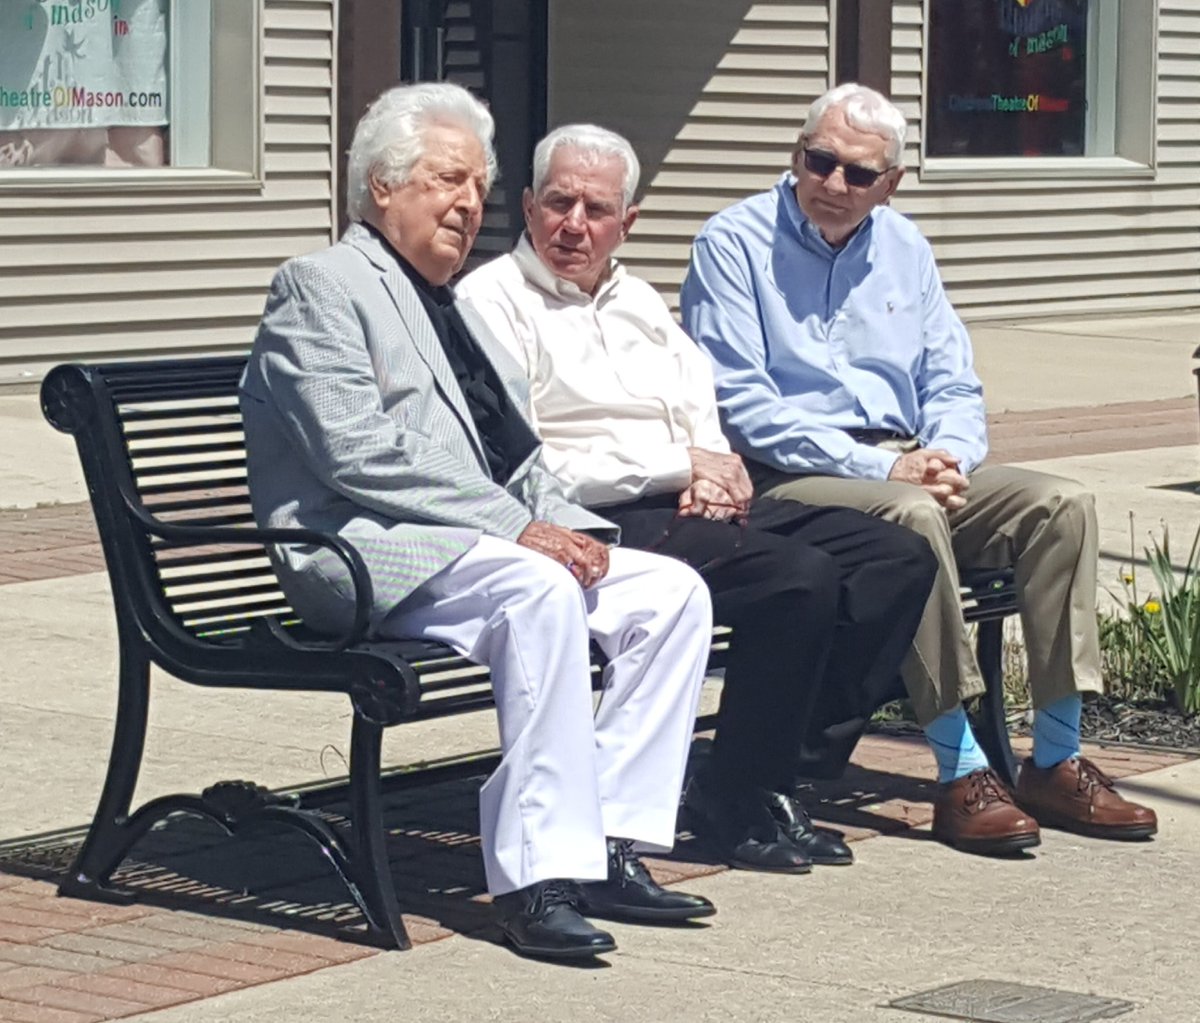 Just hanging out with three of the fine gentlemen who MADE the chamber 50 years ago. Only 21 days until the anniversary celebration! #MemoriesMADEhere @madechamber